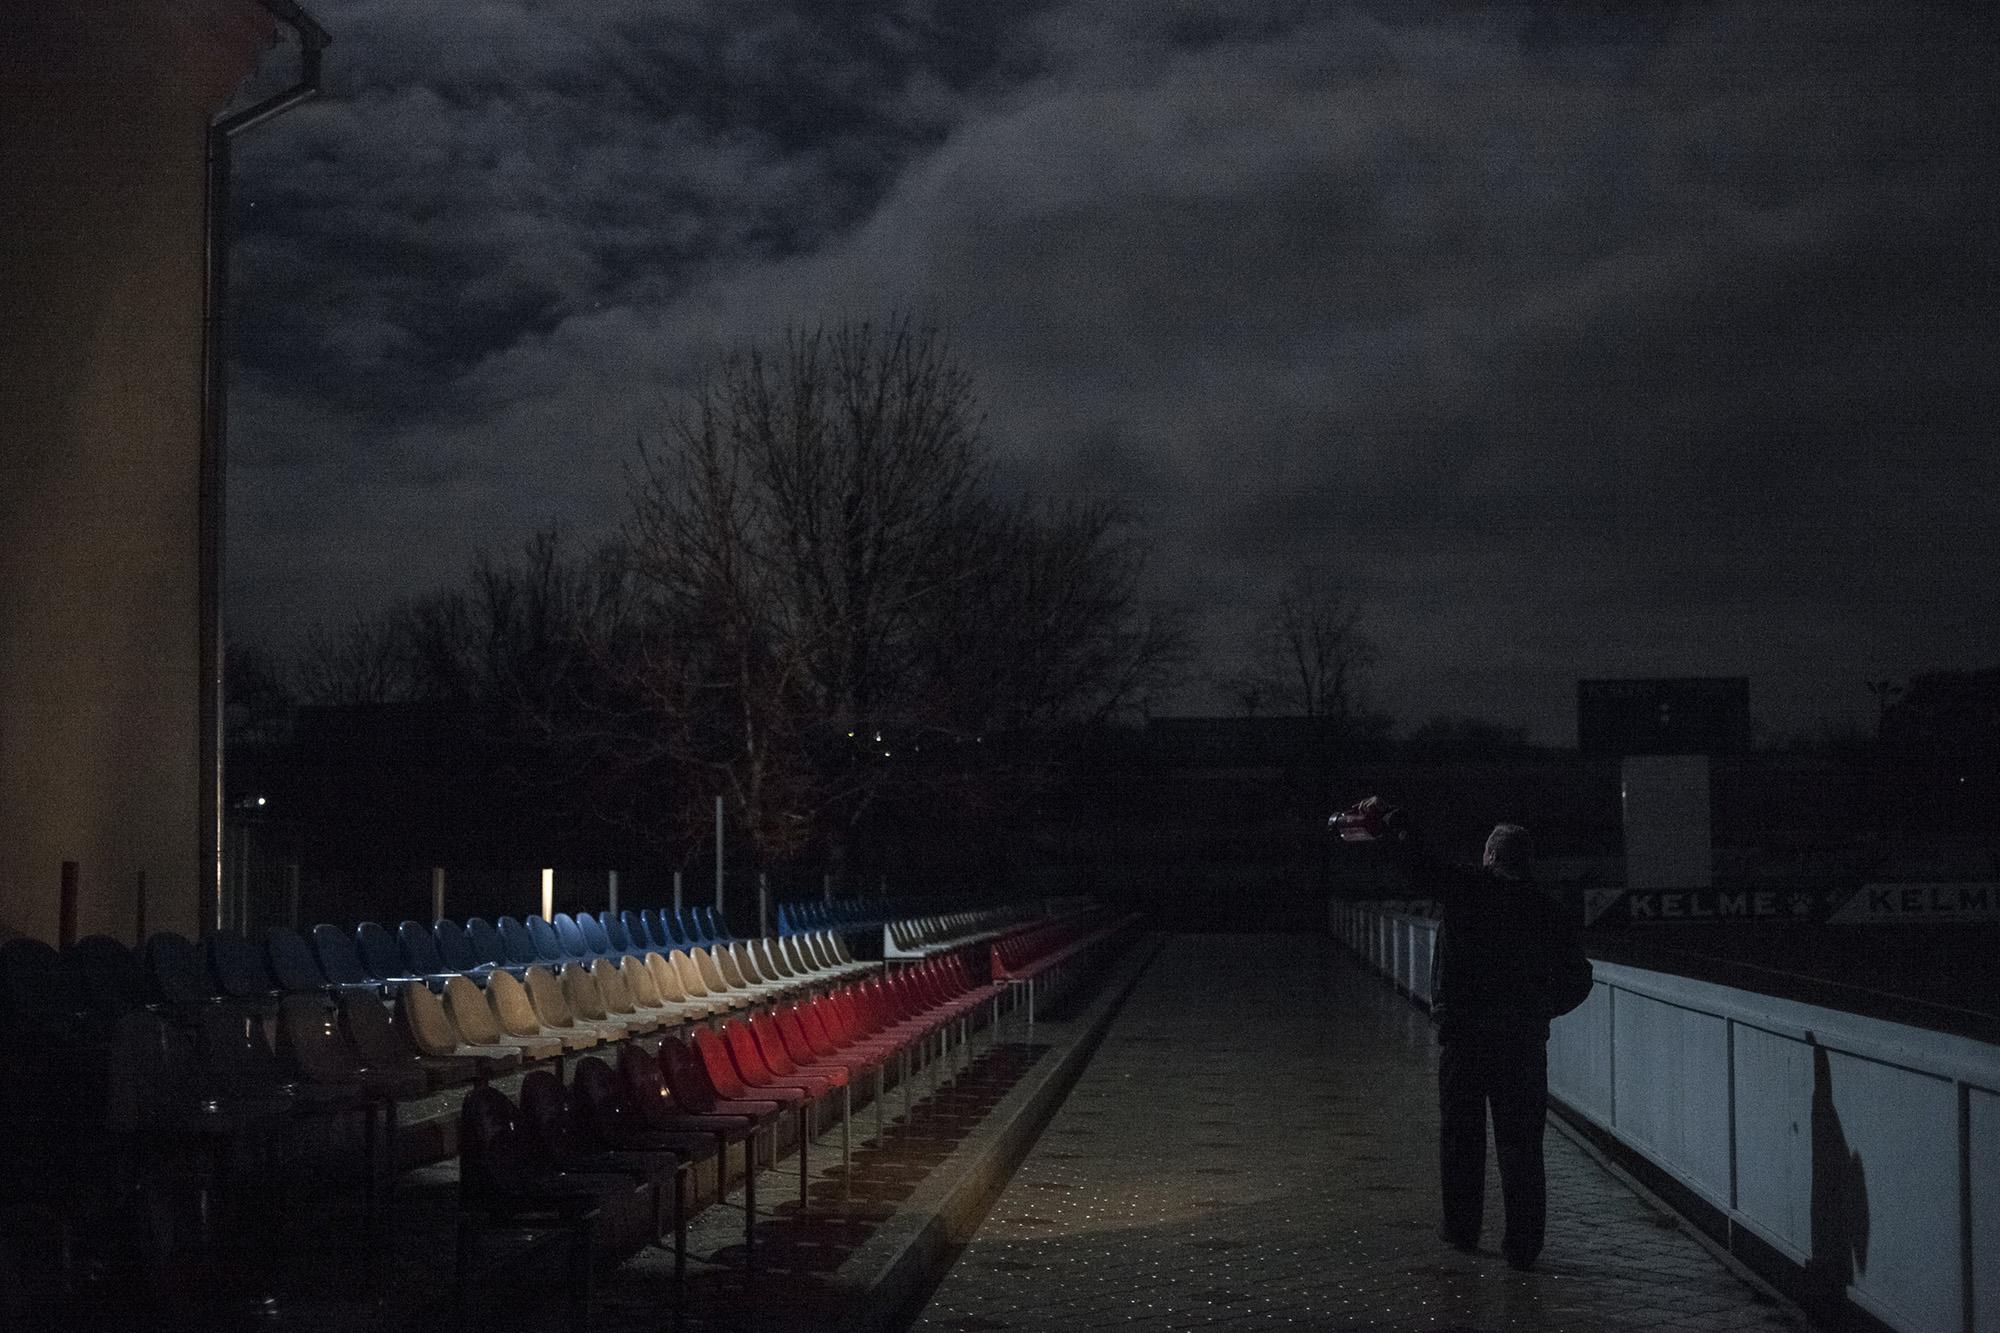 Republic of Moldova / Gagauzia / Cead&icirc;r- Lunga / the keeper of the stadium checks the seats for a round in the evening. The seats have the colors of the Gagauzian flag: blue-white-red.